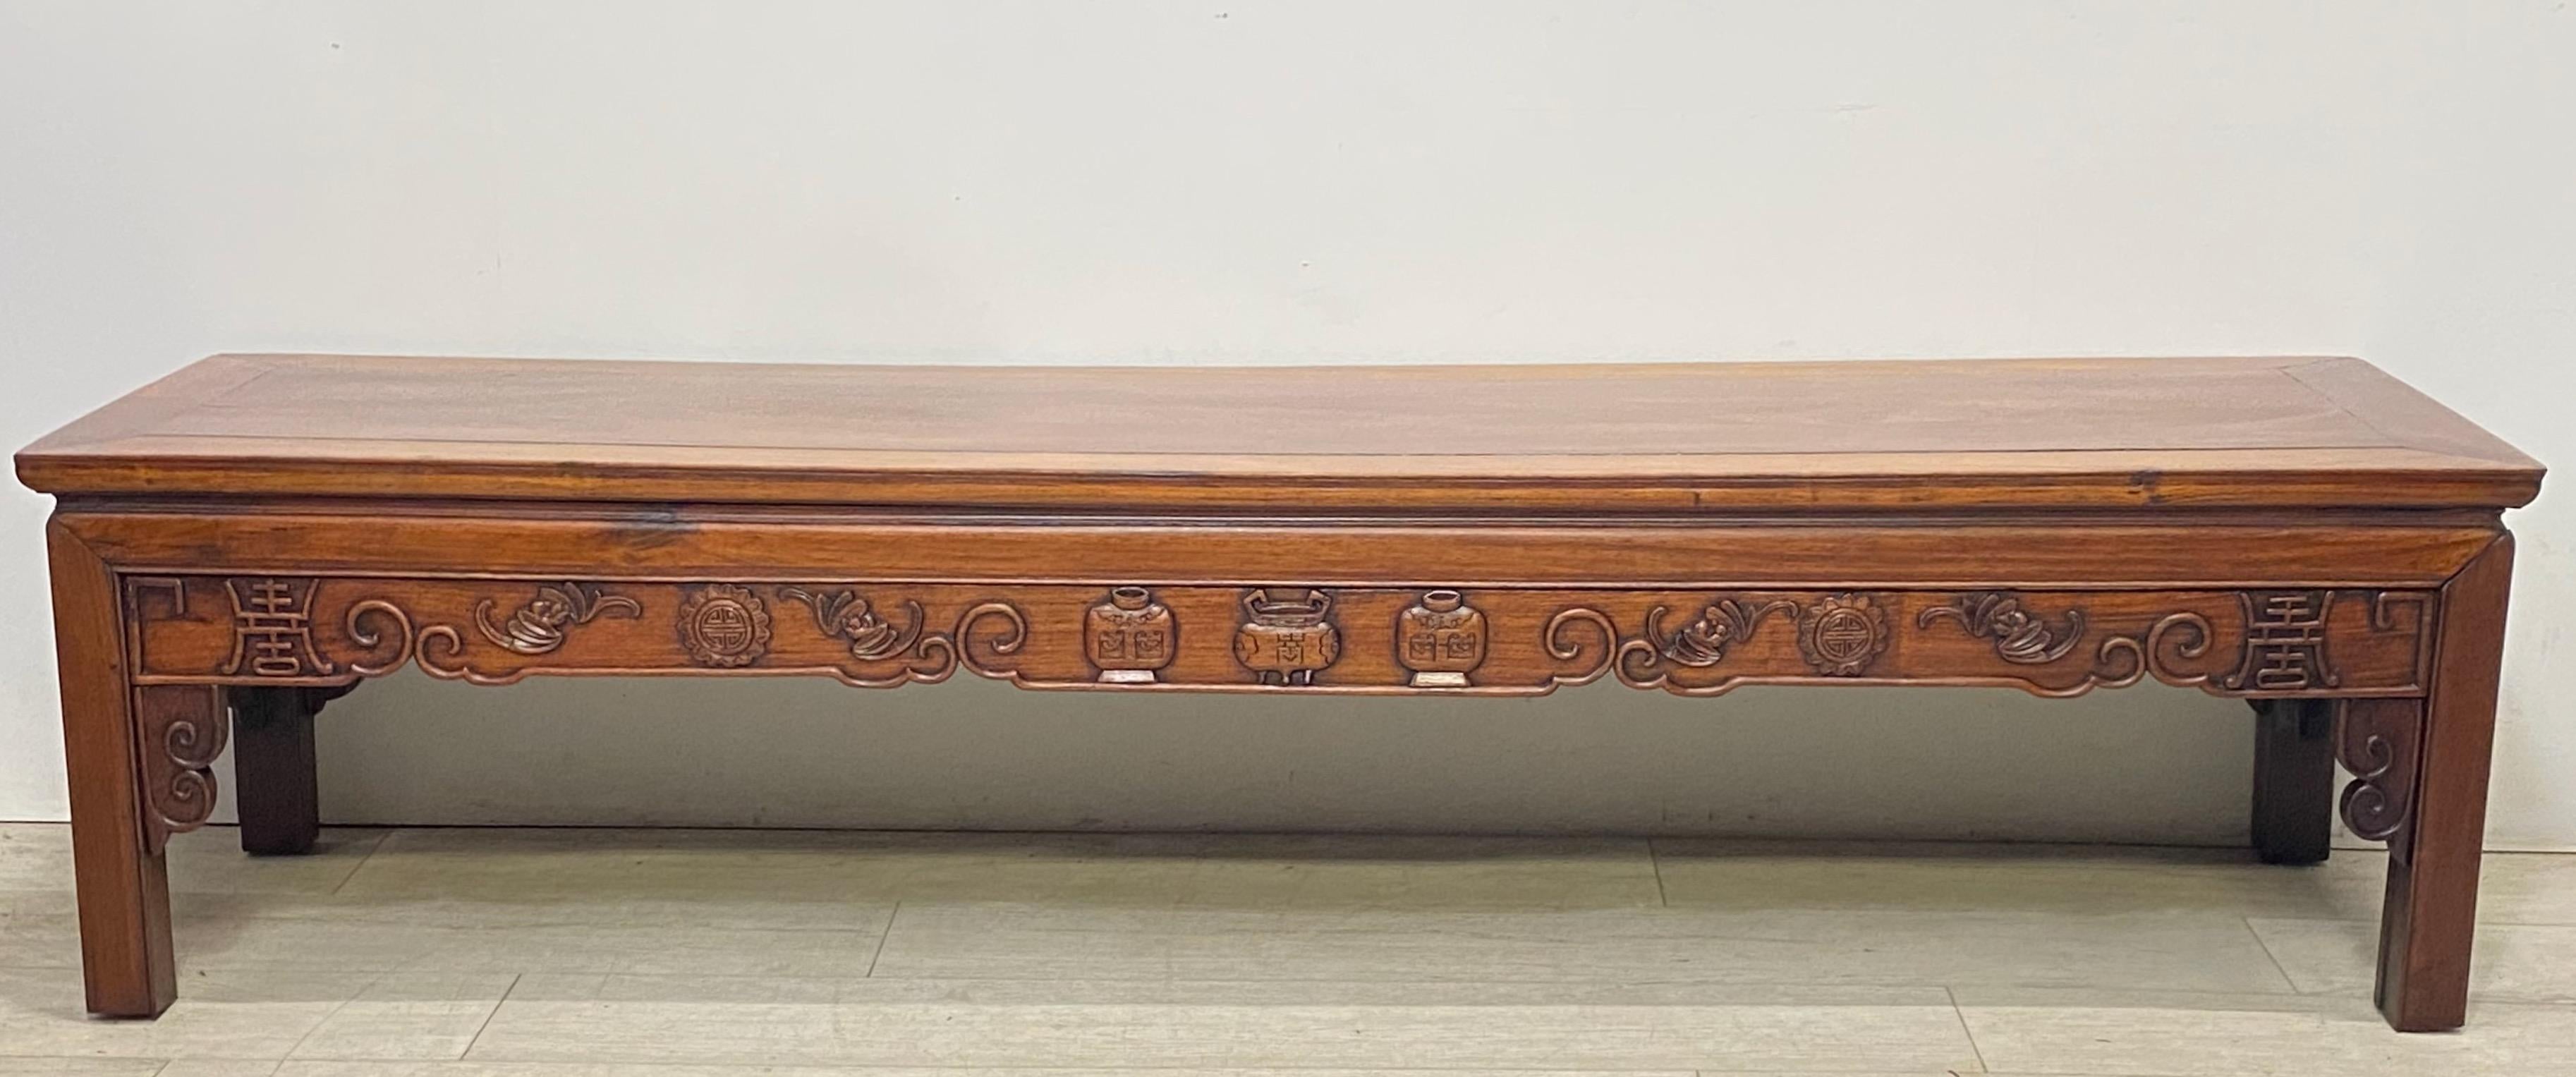 Carved Chinese Rosewood Long Low Table or Bench, Late 19th to Early 20th Century